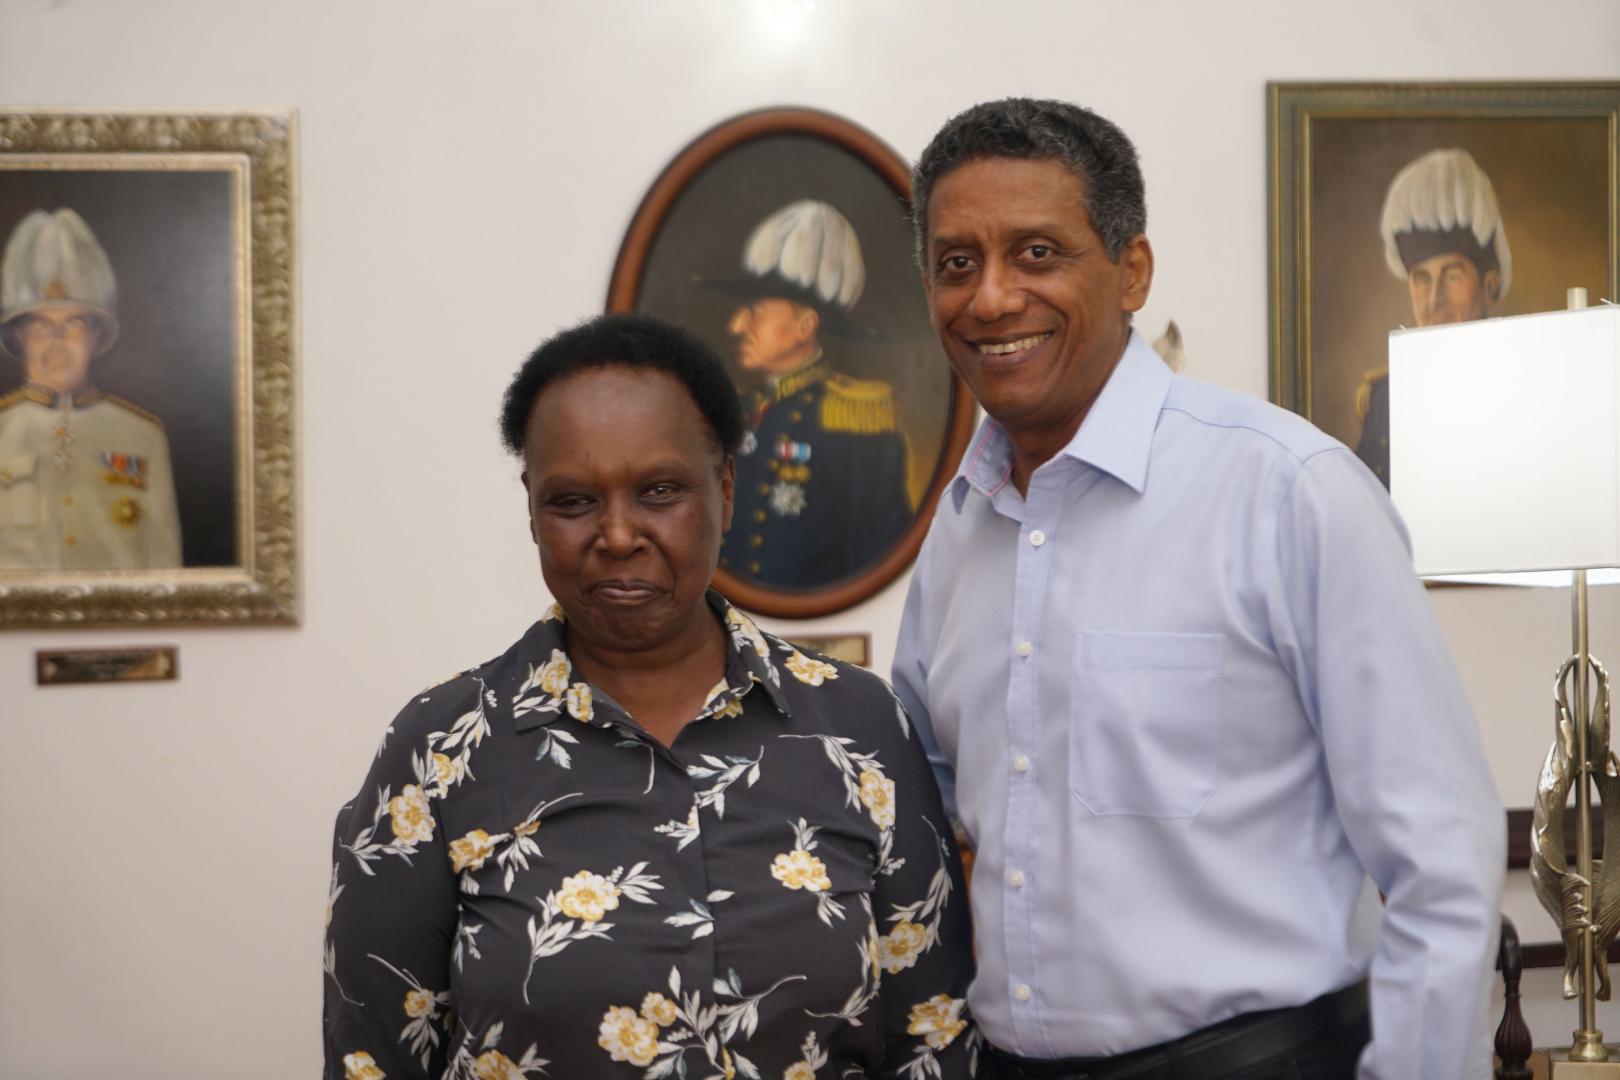 Seychelles WR Dr. Teniin Gakuruh with the Head of State HE Danny Faure at State House, Victoria, Seychelles